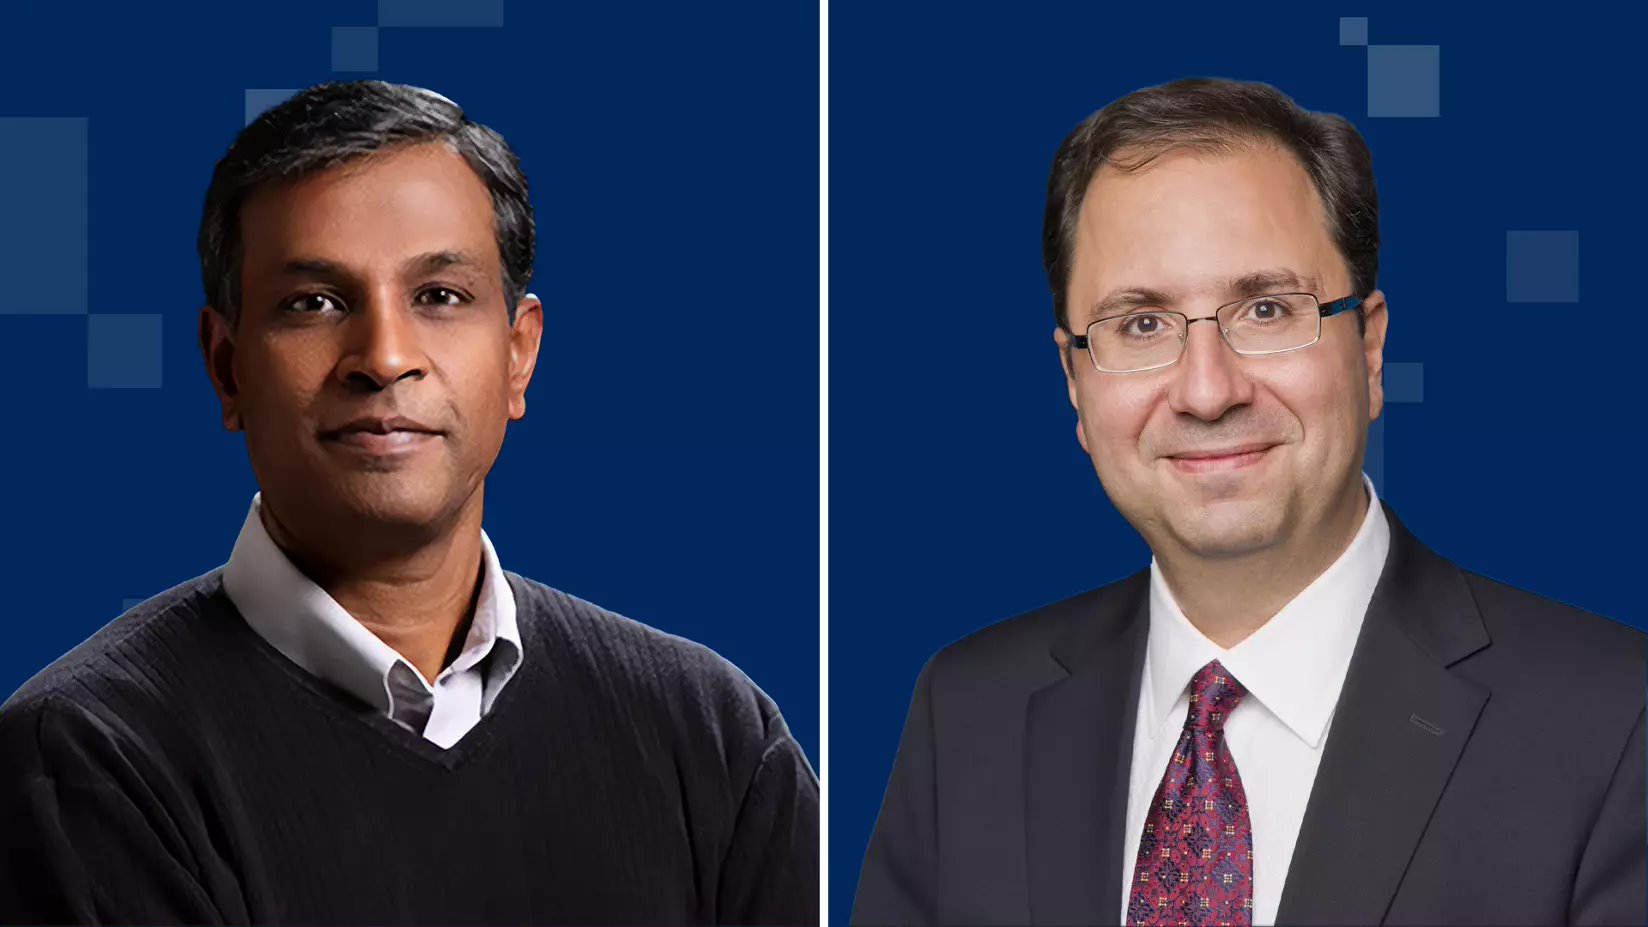 Intel once again adjusts its foundry business leadership: Naga Chandrasekaran takes over as chief global operating officer